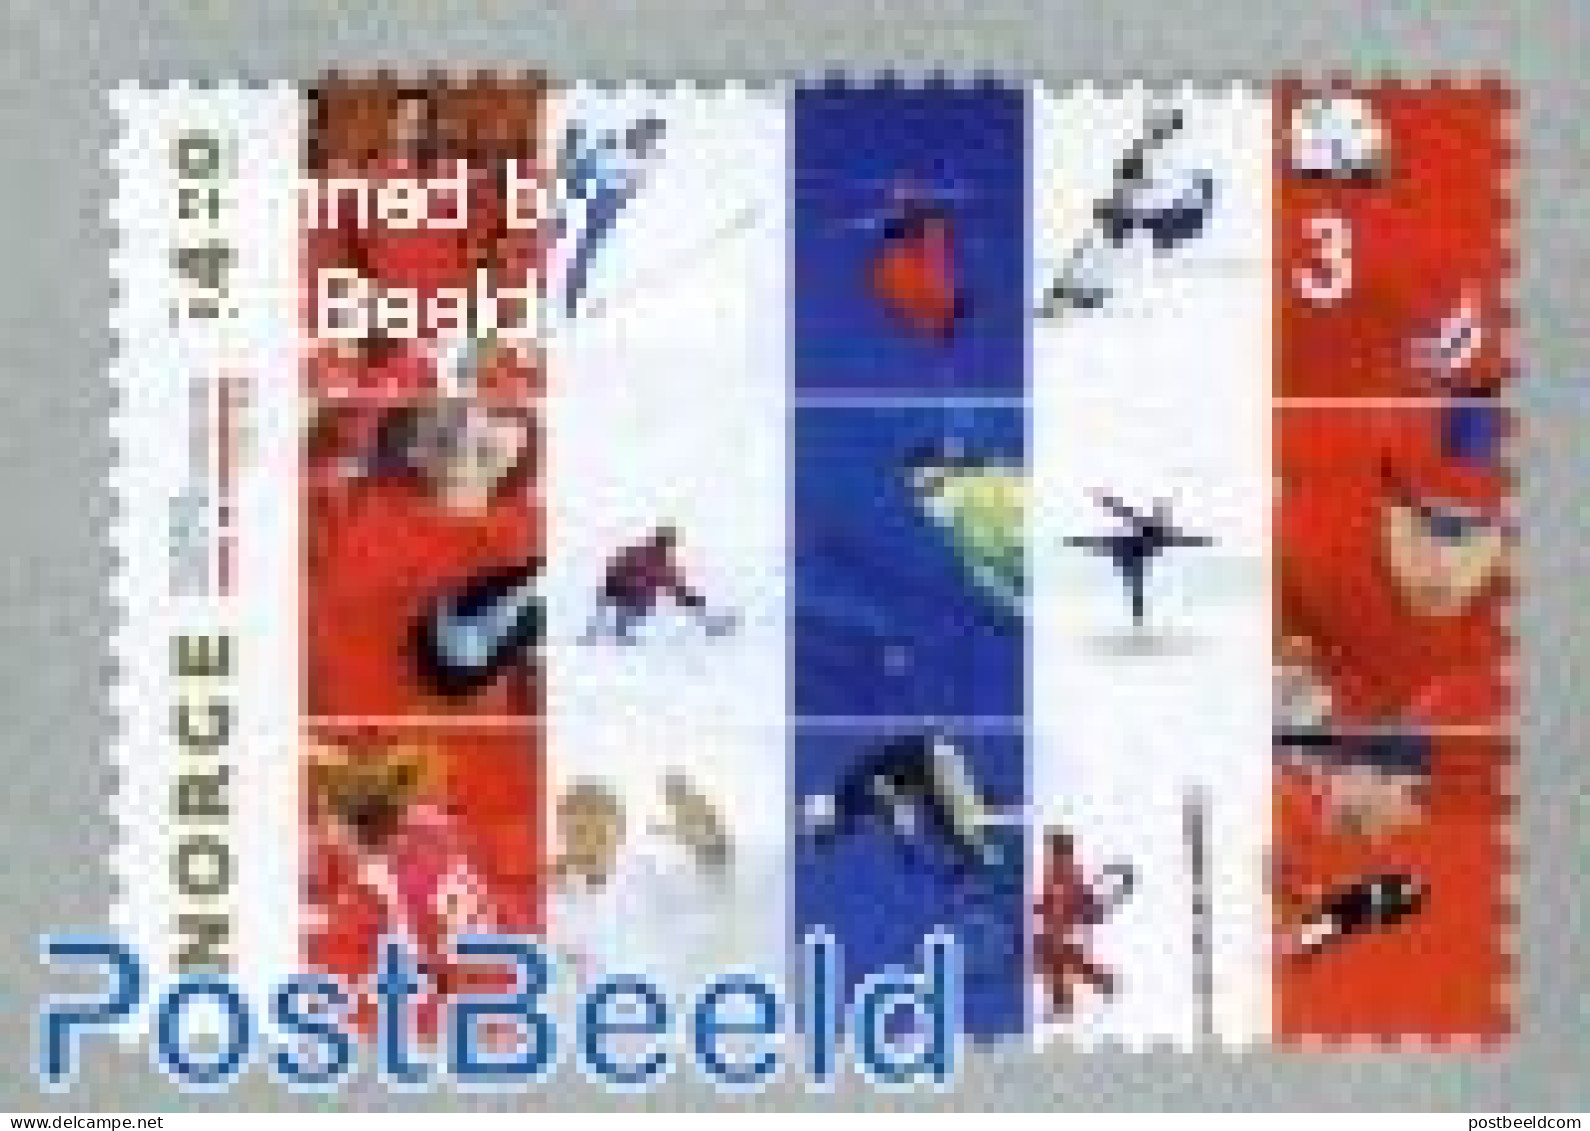 Norway 2011 Sport Association 1v S-a, Mint NH, Sport - Cycling - Judo - Skiing - Sport (other And Mixed) - Ongebruikt